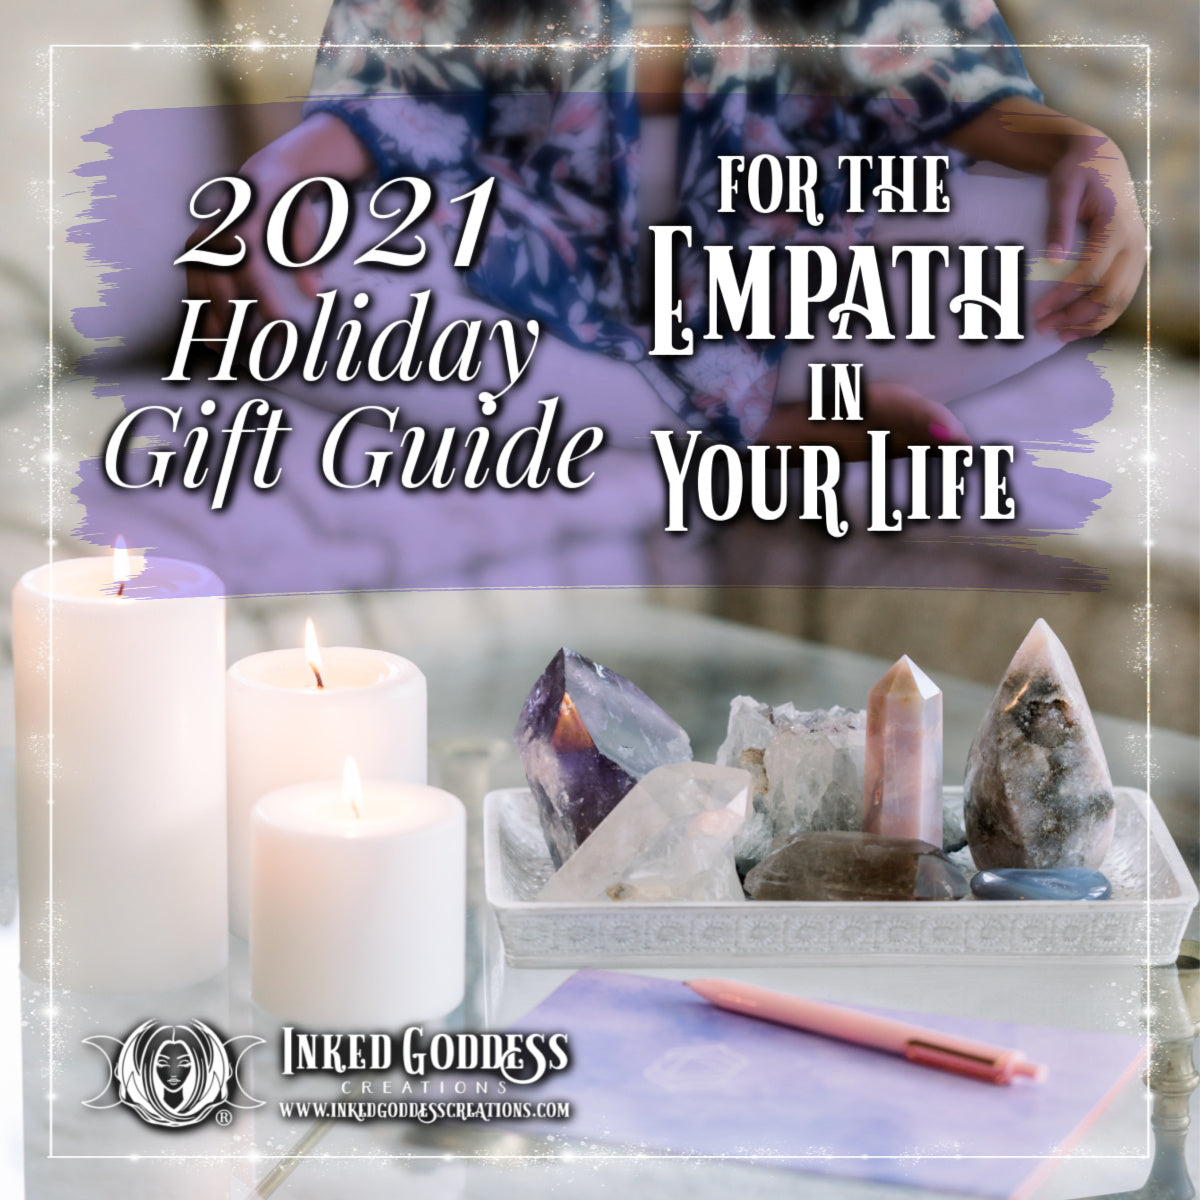 2021 Holiday Gift Guide for the Empath in Your Life